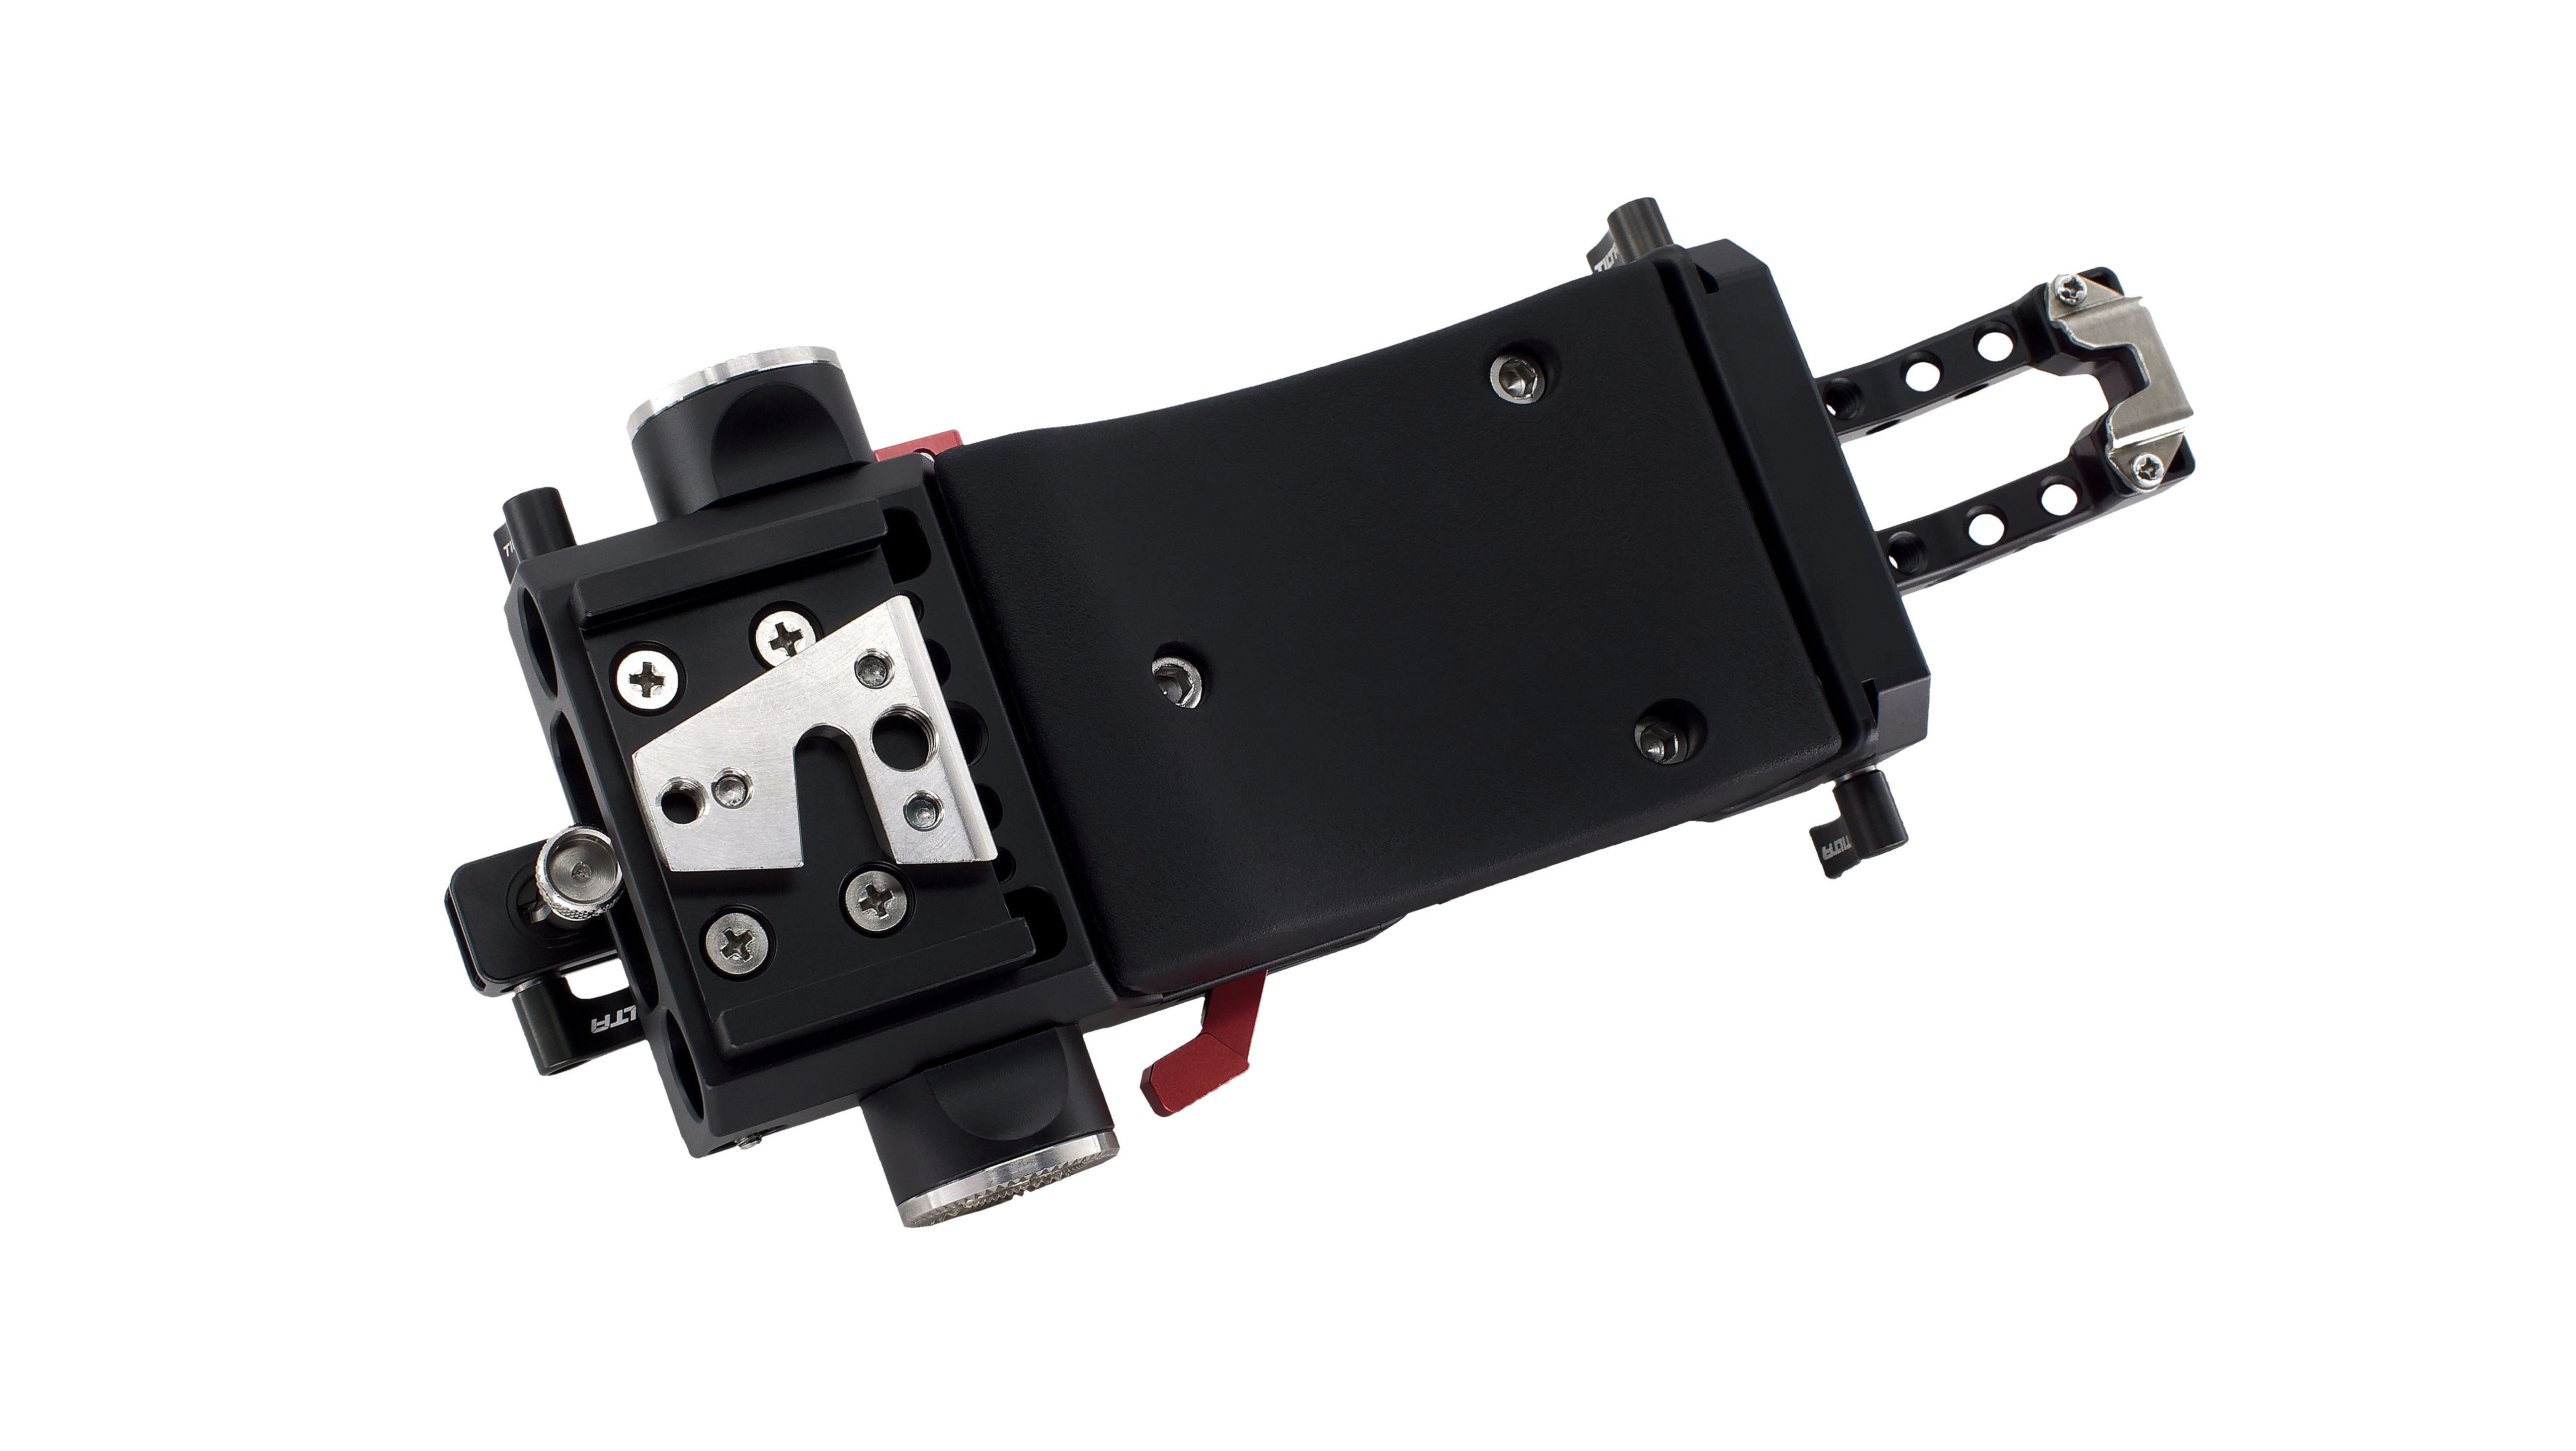 15mm LWS Quick Release Baseplate for Sony FS5 | Tilta